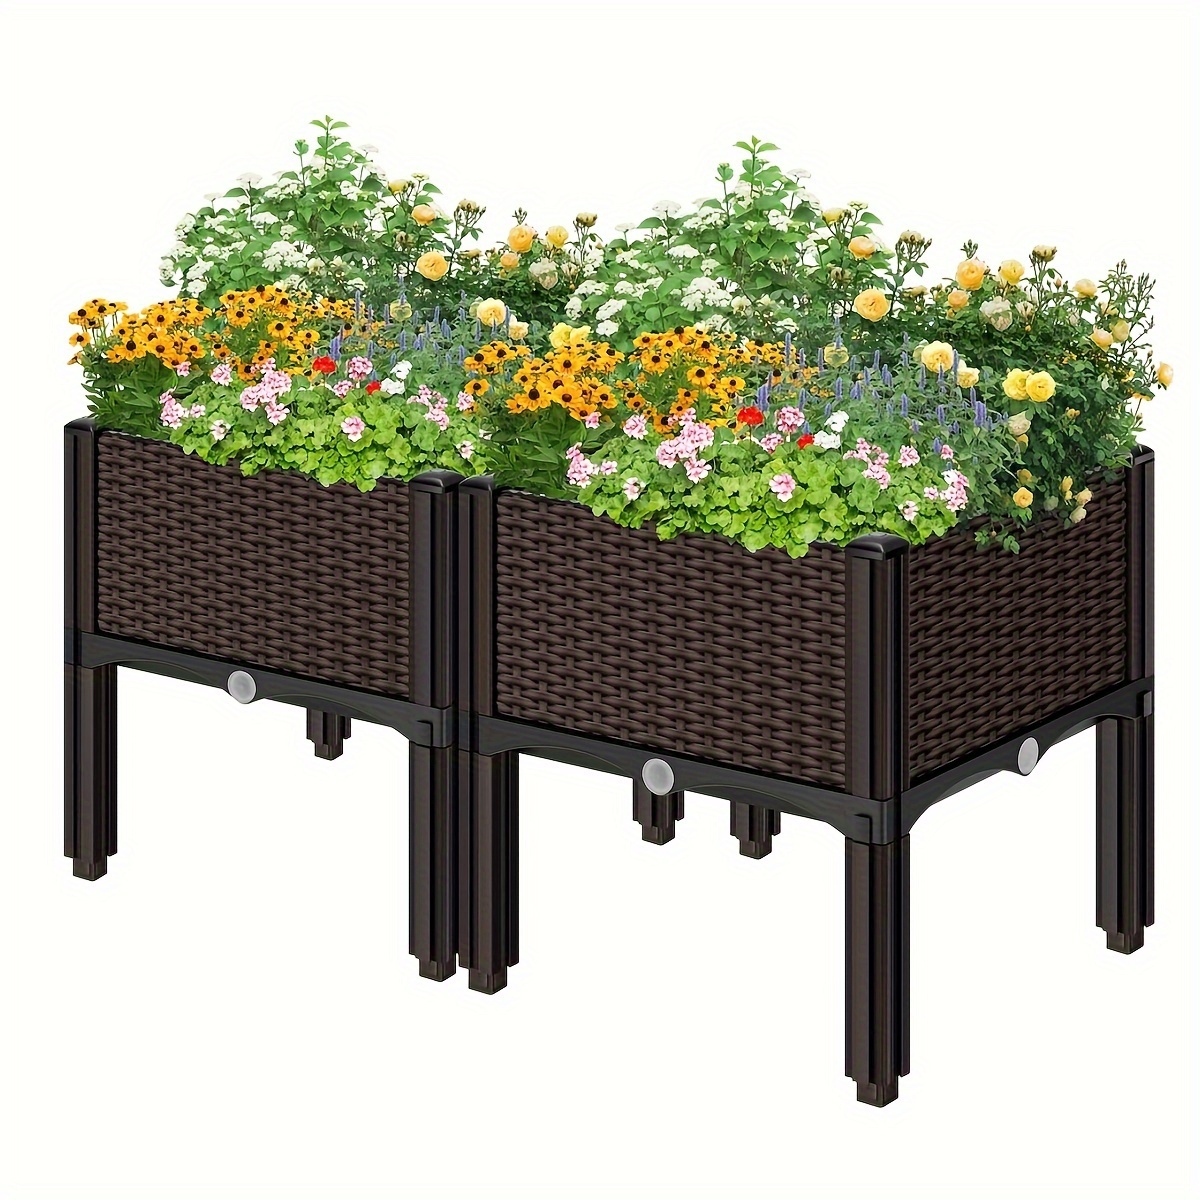 

Elevated Plastic Garden Planter Kit - Raised Outdoor Flower & Vegetable Stand With Drainage Holes For Patio, Deck, Porch Planter Pots Flower Pots Outdoor